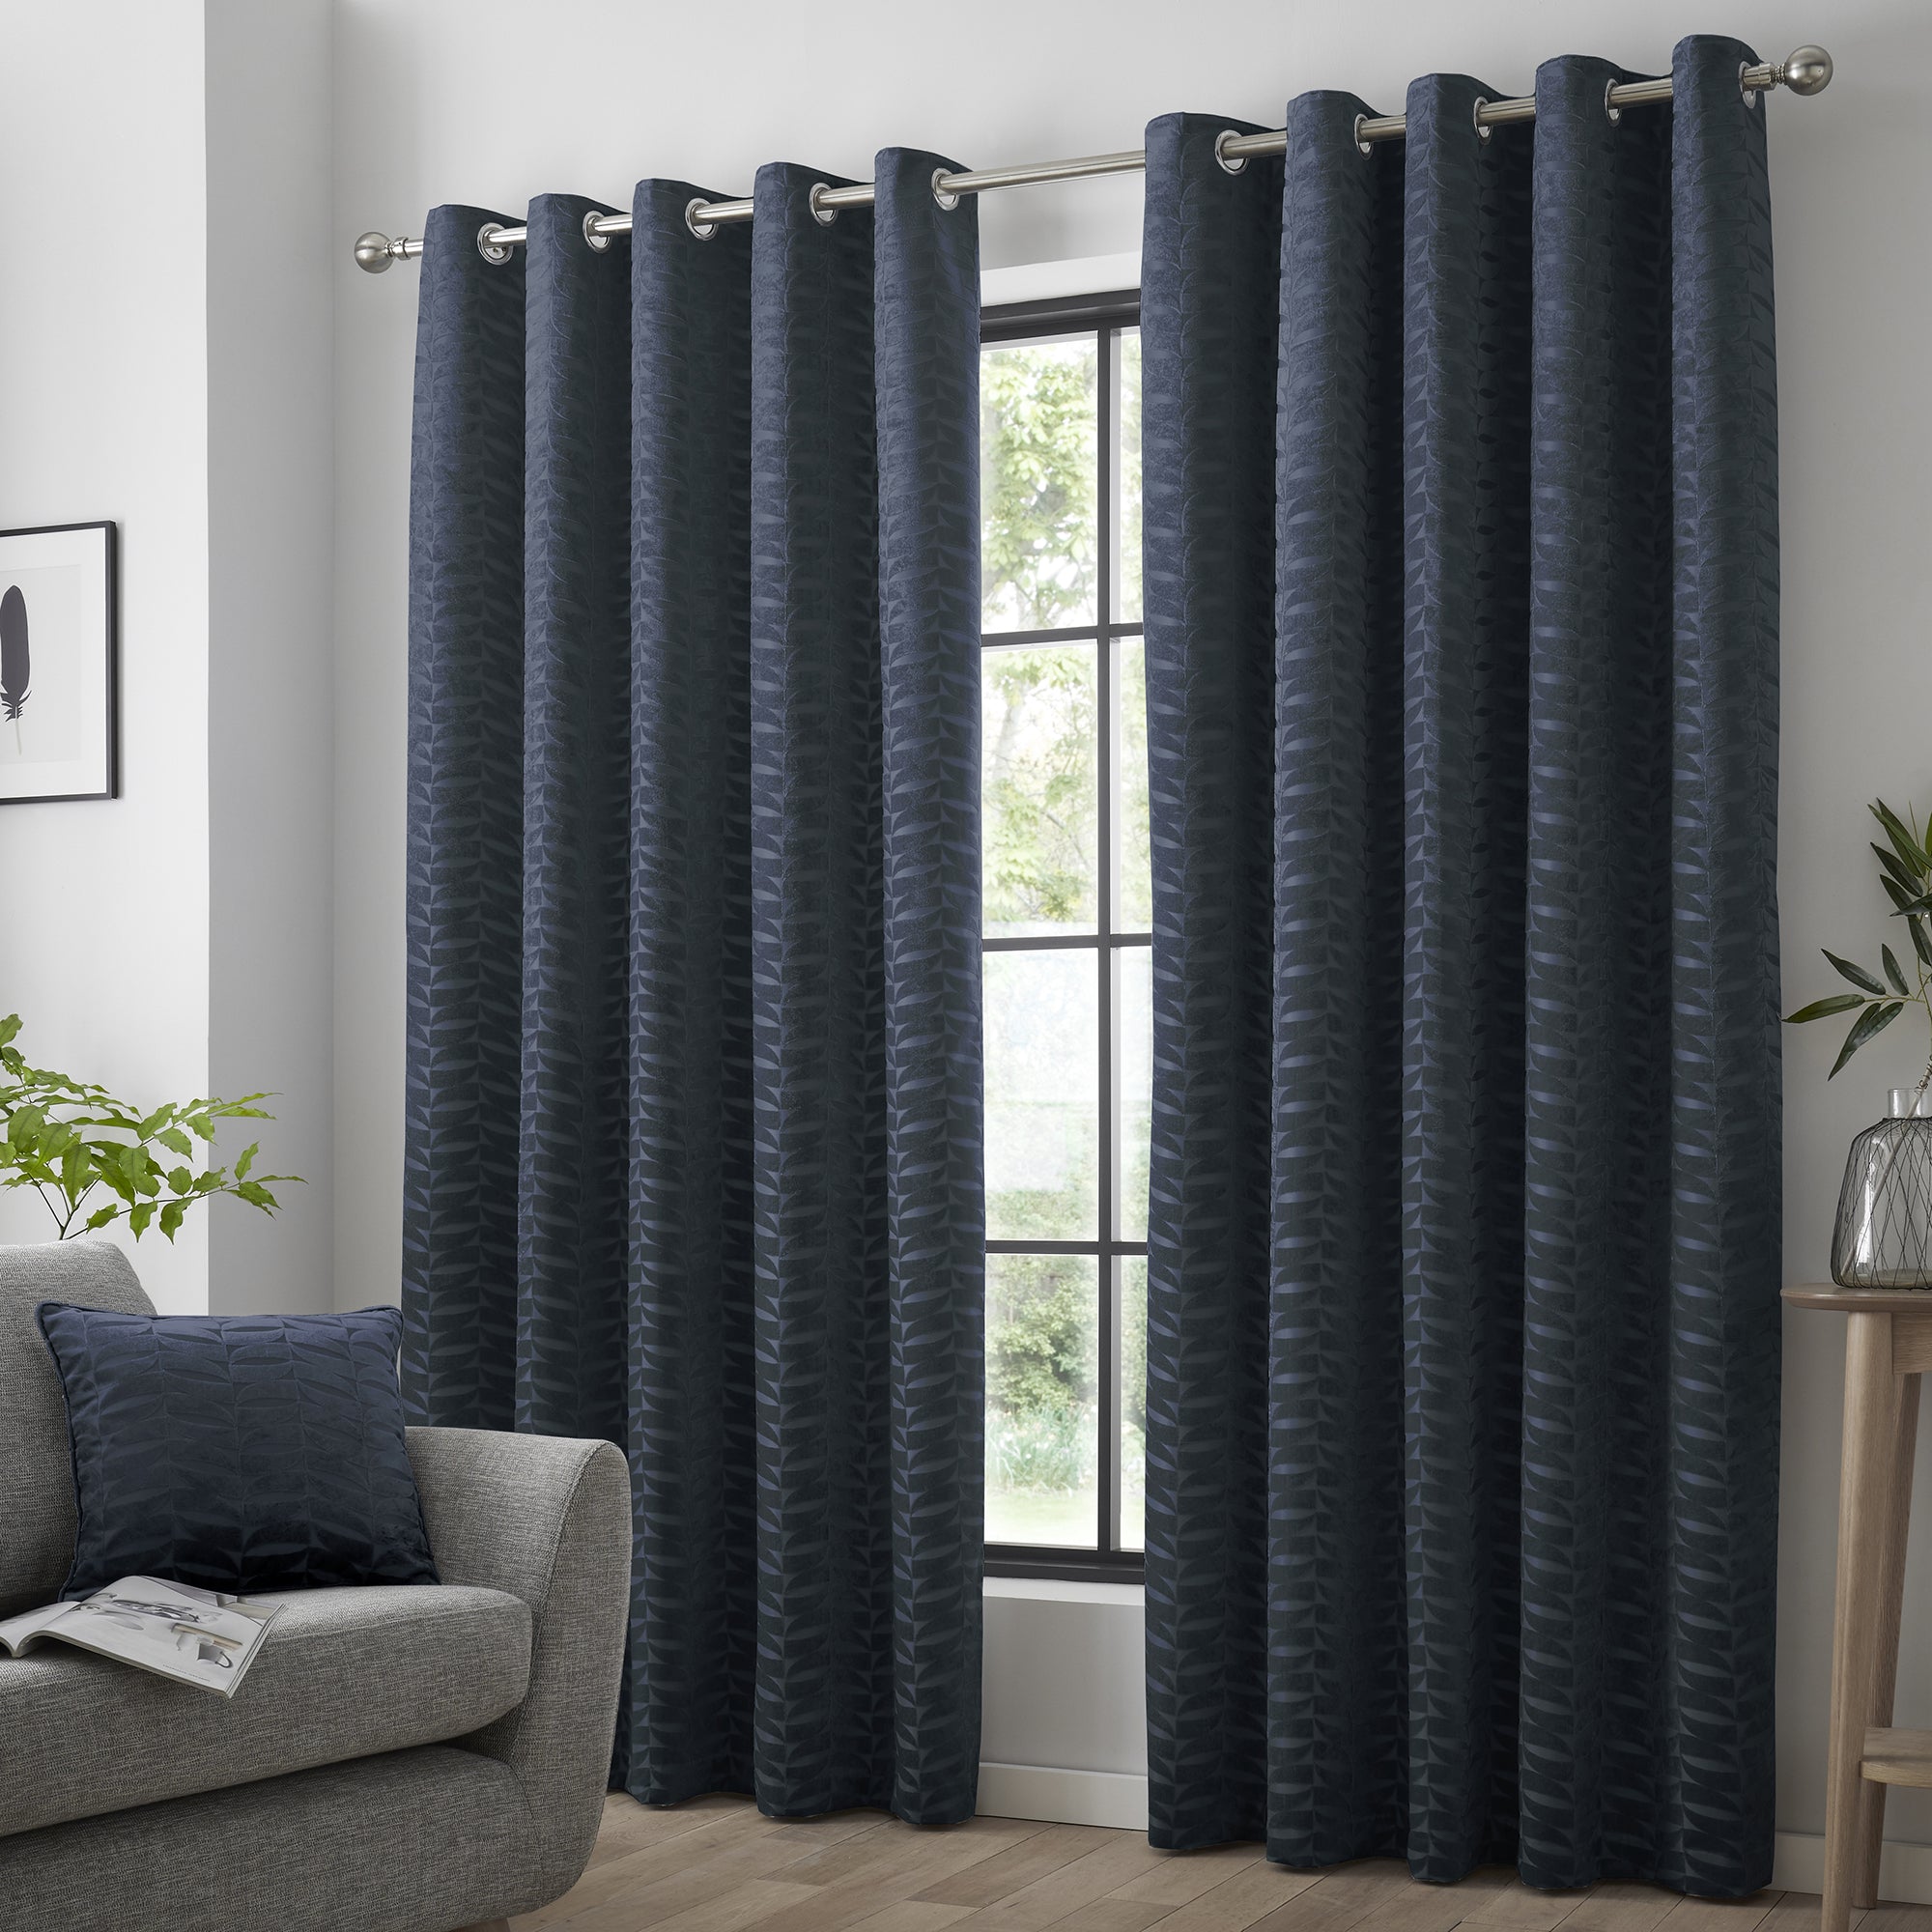 Kendal - Geometric Jacquard Eyelet Curtains in Navy - By Curtina